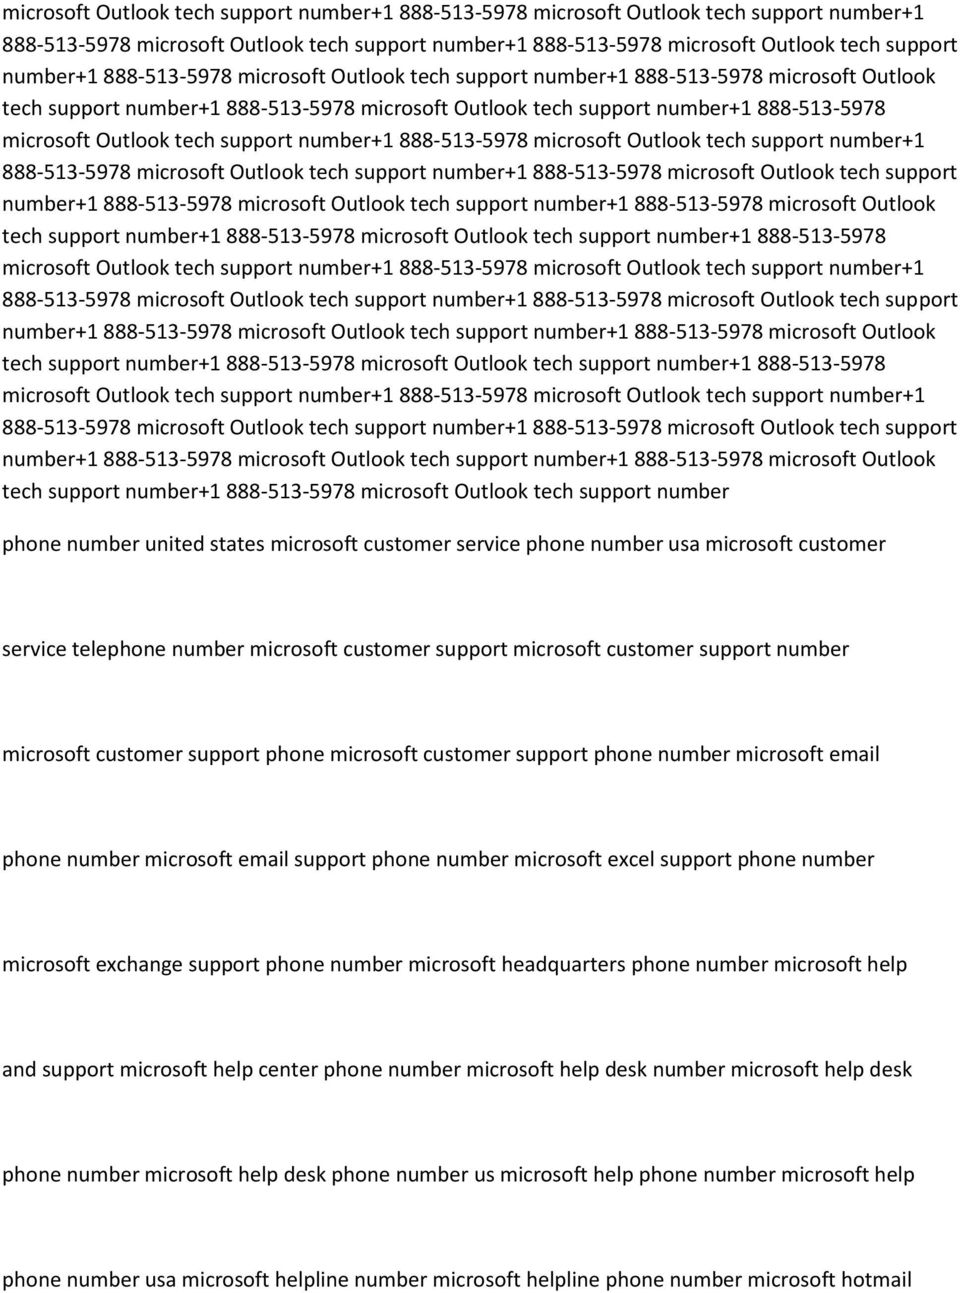 microsoft excel support phone number microsoft exchange support phone number microsoft headquarters phone number microsoft help and support microsoft help center phone number microsoft help desk